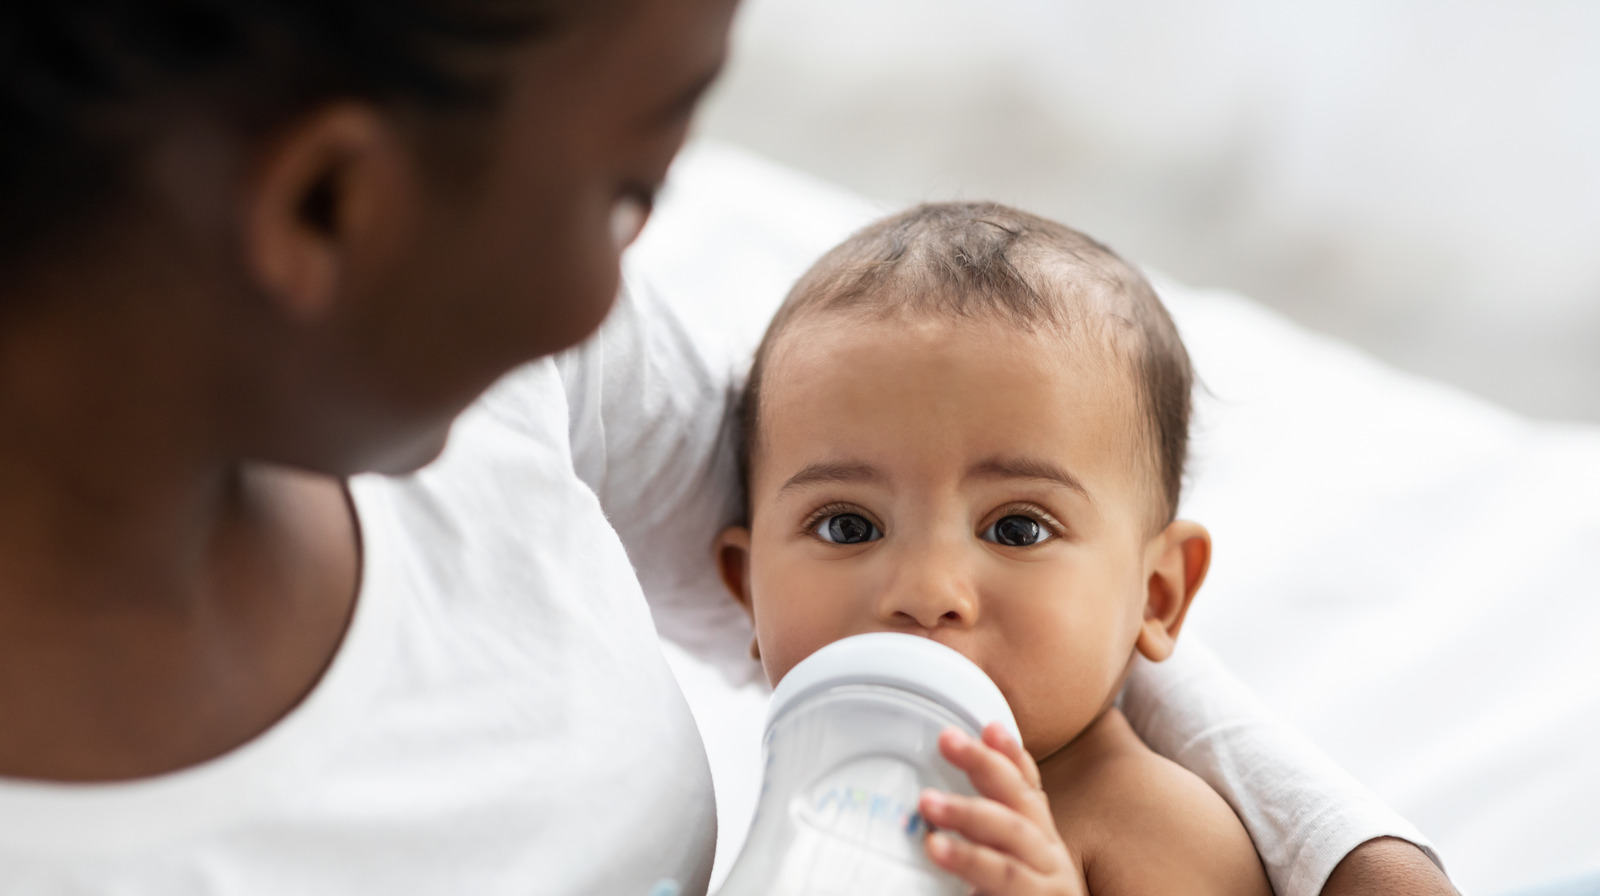 The Baby Formula Shortage May Be Over Sooner Than Anticipated. Here's Why